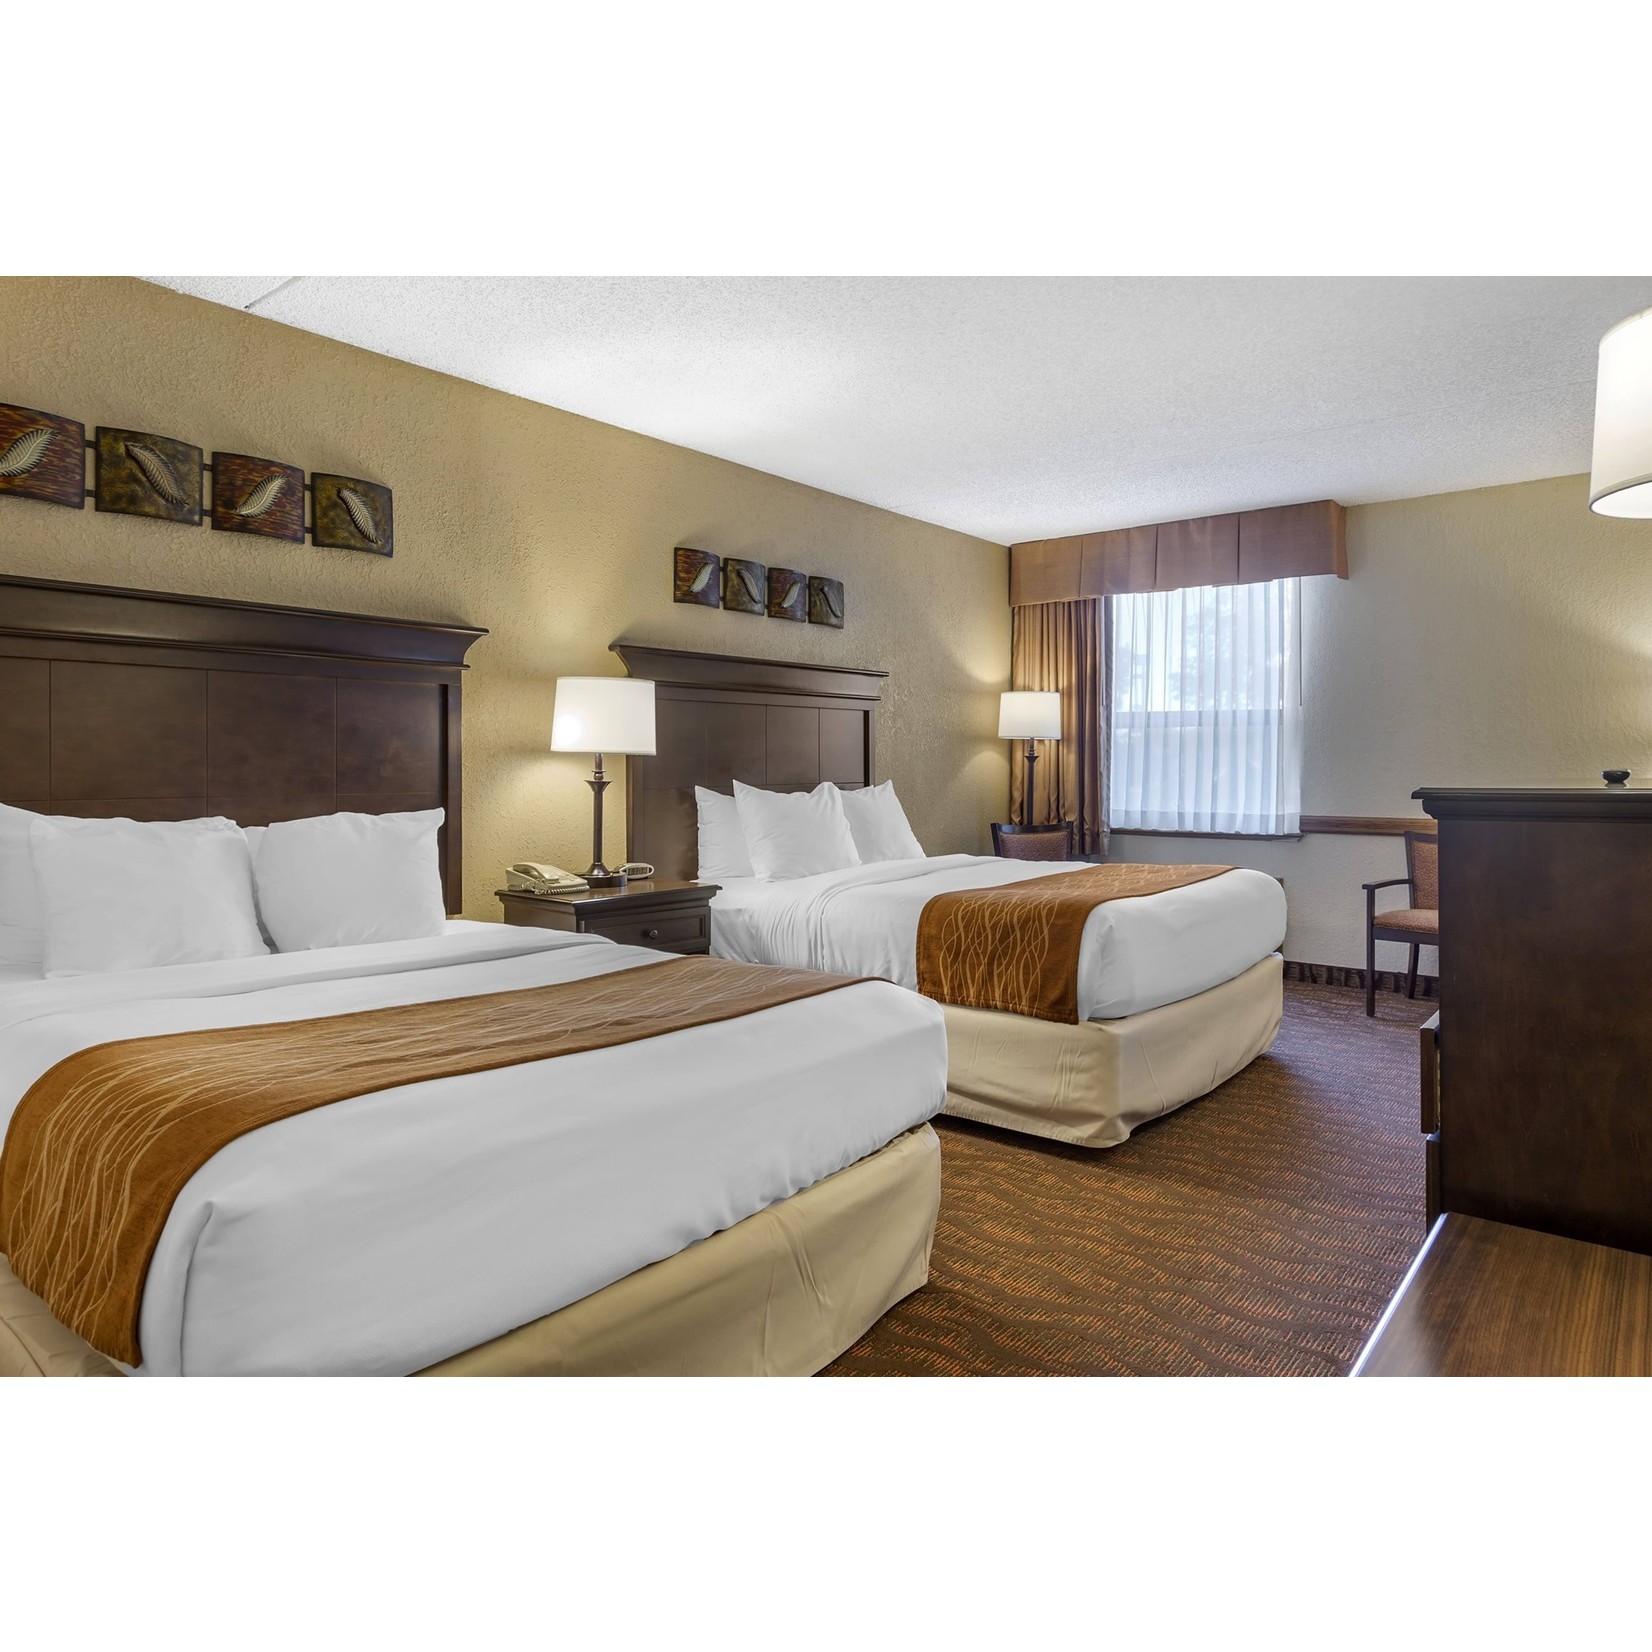 MO-Branson-Comfort Inn at Thousand Hills-Branson MO-Branson-Comfort Inn at Thousand Hills-Branson $215.00 (1) Night Stay  Hotel & Show Package